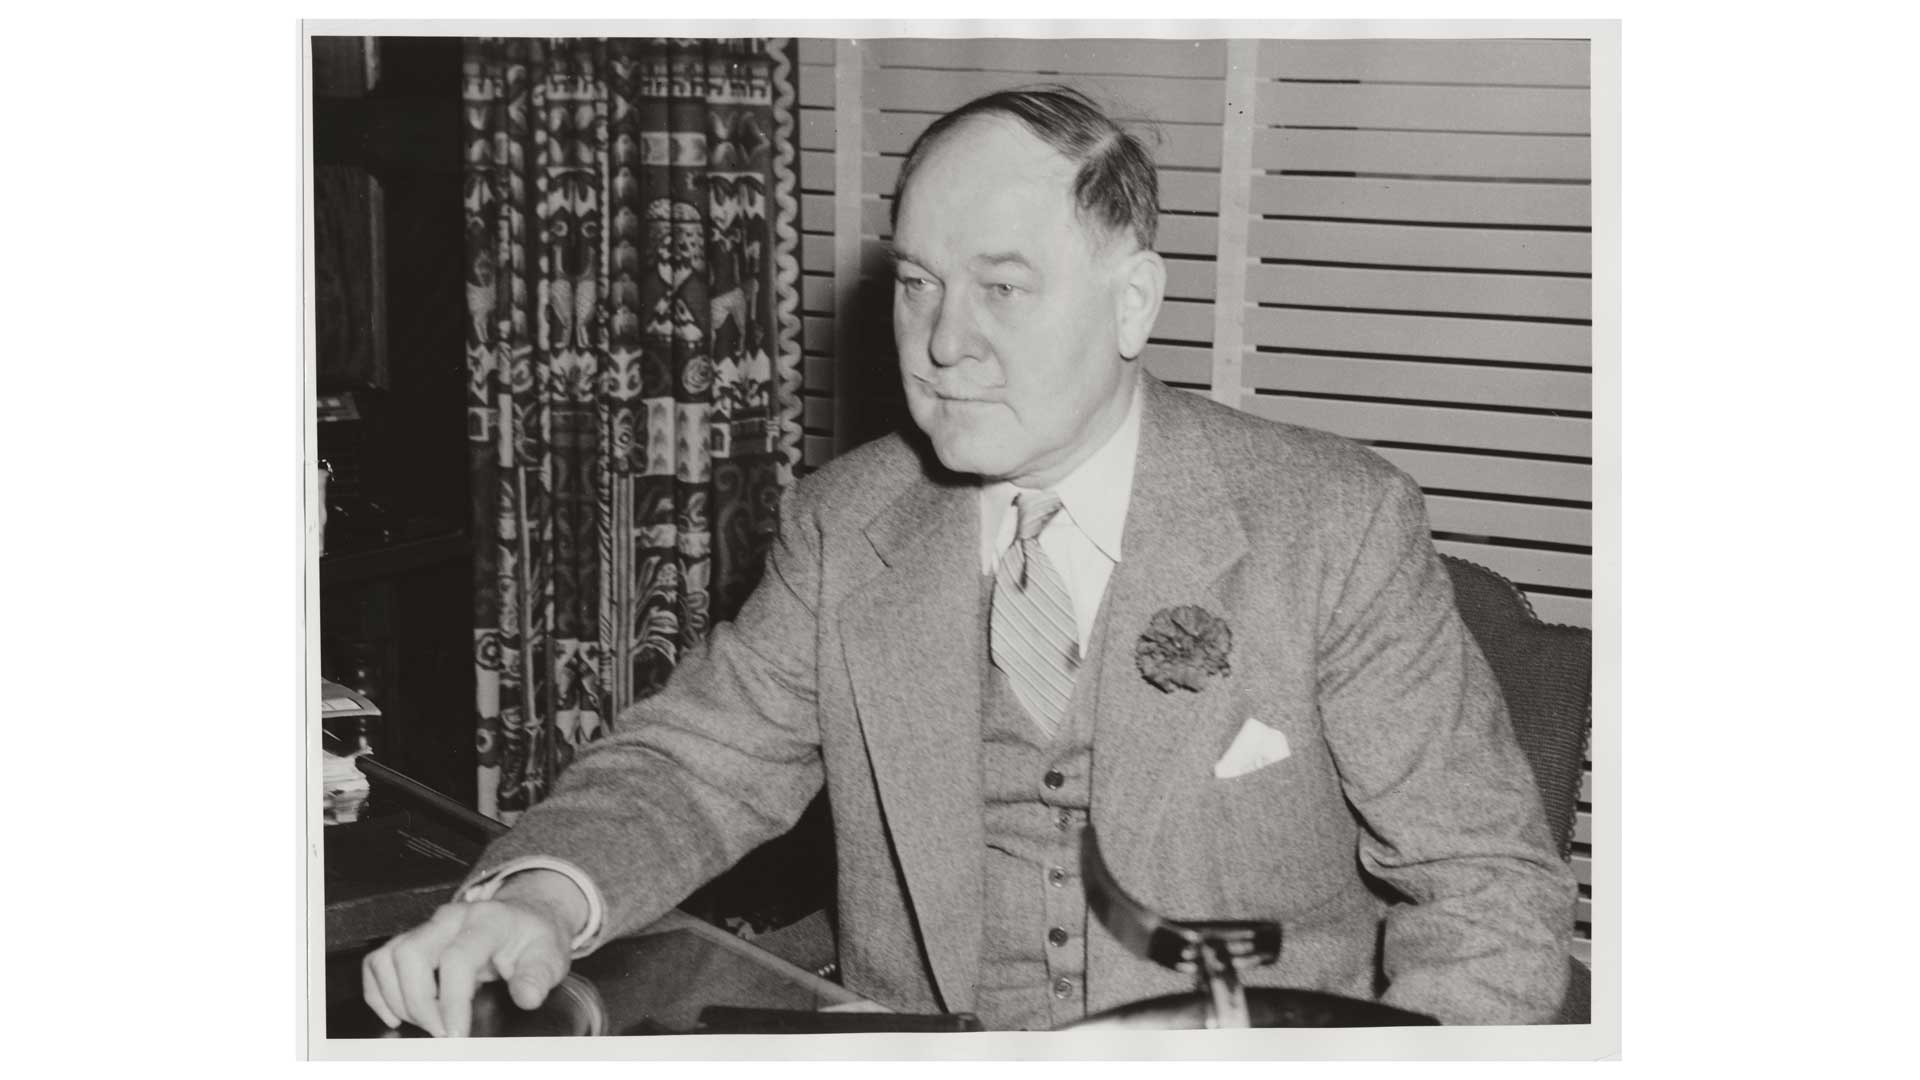 black and white image of man in suit sitting at table office